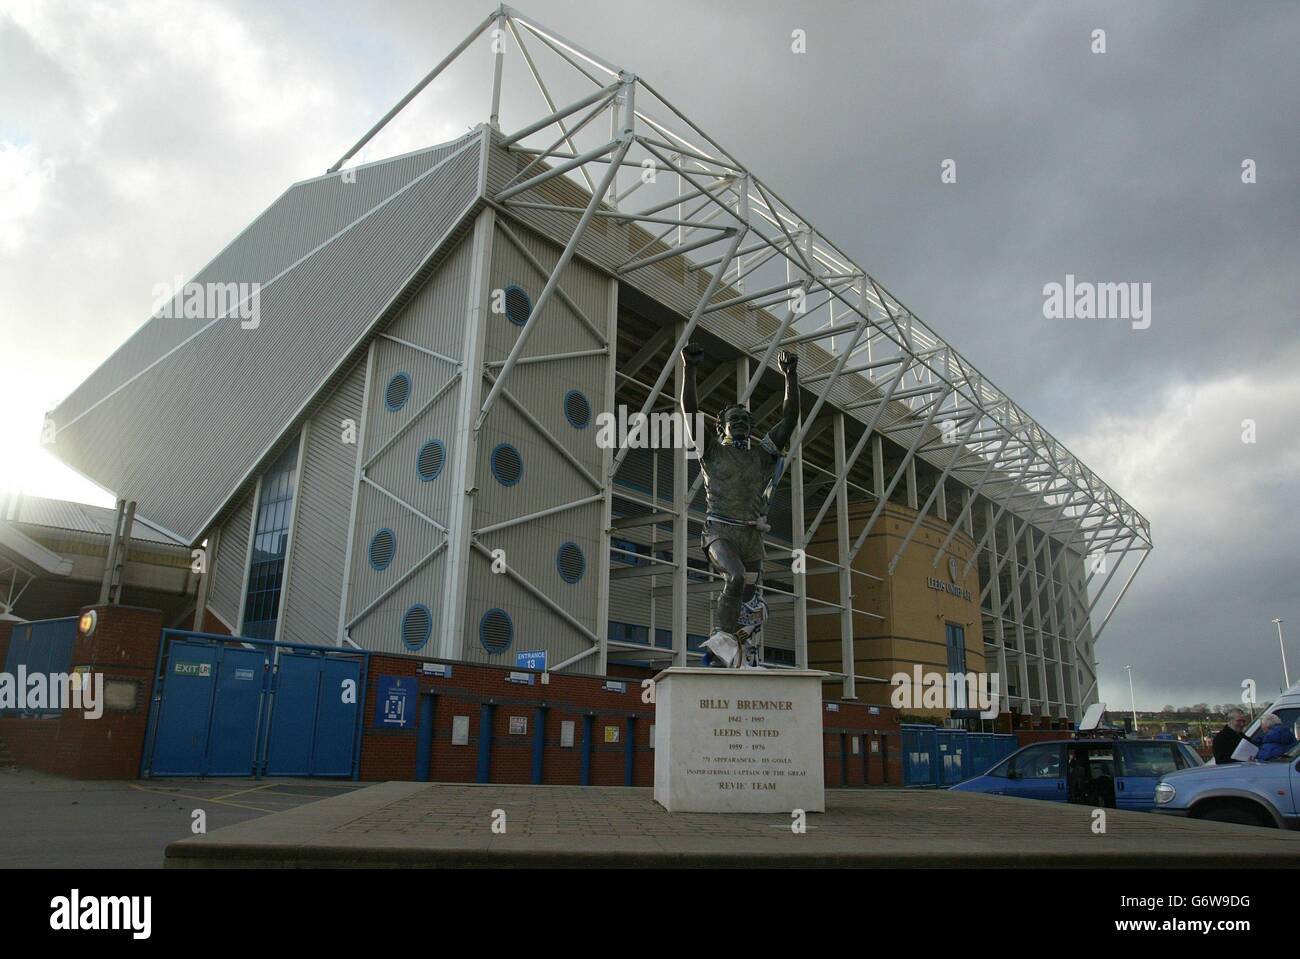 Elland Road football ground home of Leeds United. On 19 March, 2004, Garry Wilson and Alan Bloom, both Partners in Ernst & Young LLP, and Brendan Guilfoyle of The P&A Partnership were appointed as joint adminstrators of Leeds United plc and Leeds United Holdings Limited, a subsidiary company. Leeds United plc is the ultimate parent company for a number of subsidiary companies (together 'the Group') including Leeds United AFC Limited, which operates the football club. For the avoidance of doubt, Leeds United AFC Limited has not entered adminstration proceedings. Stock Photo